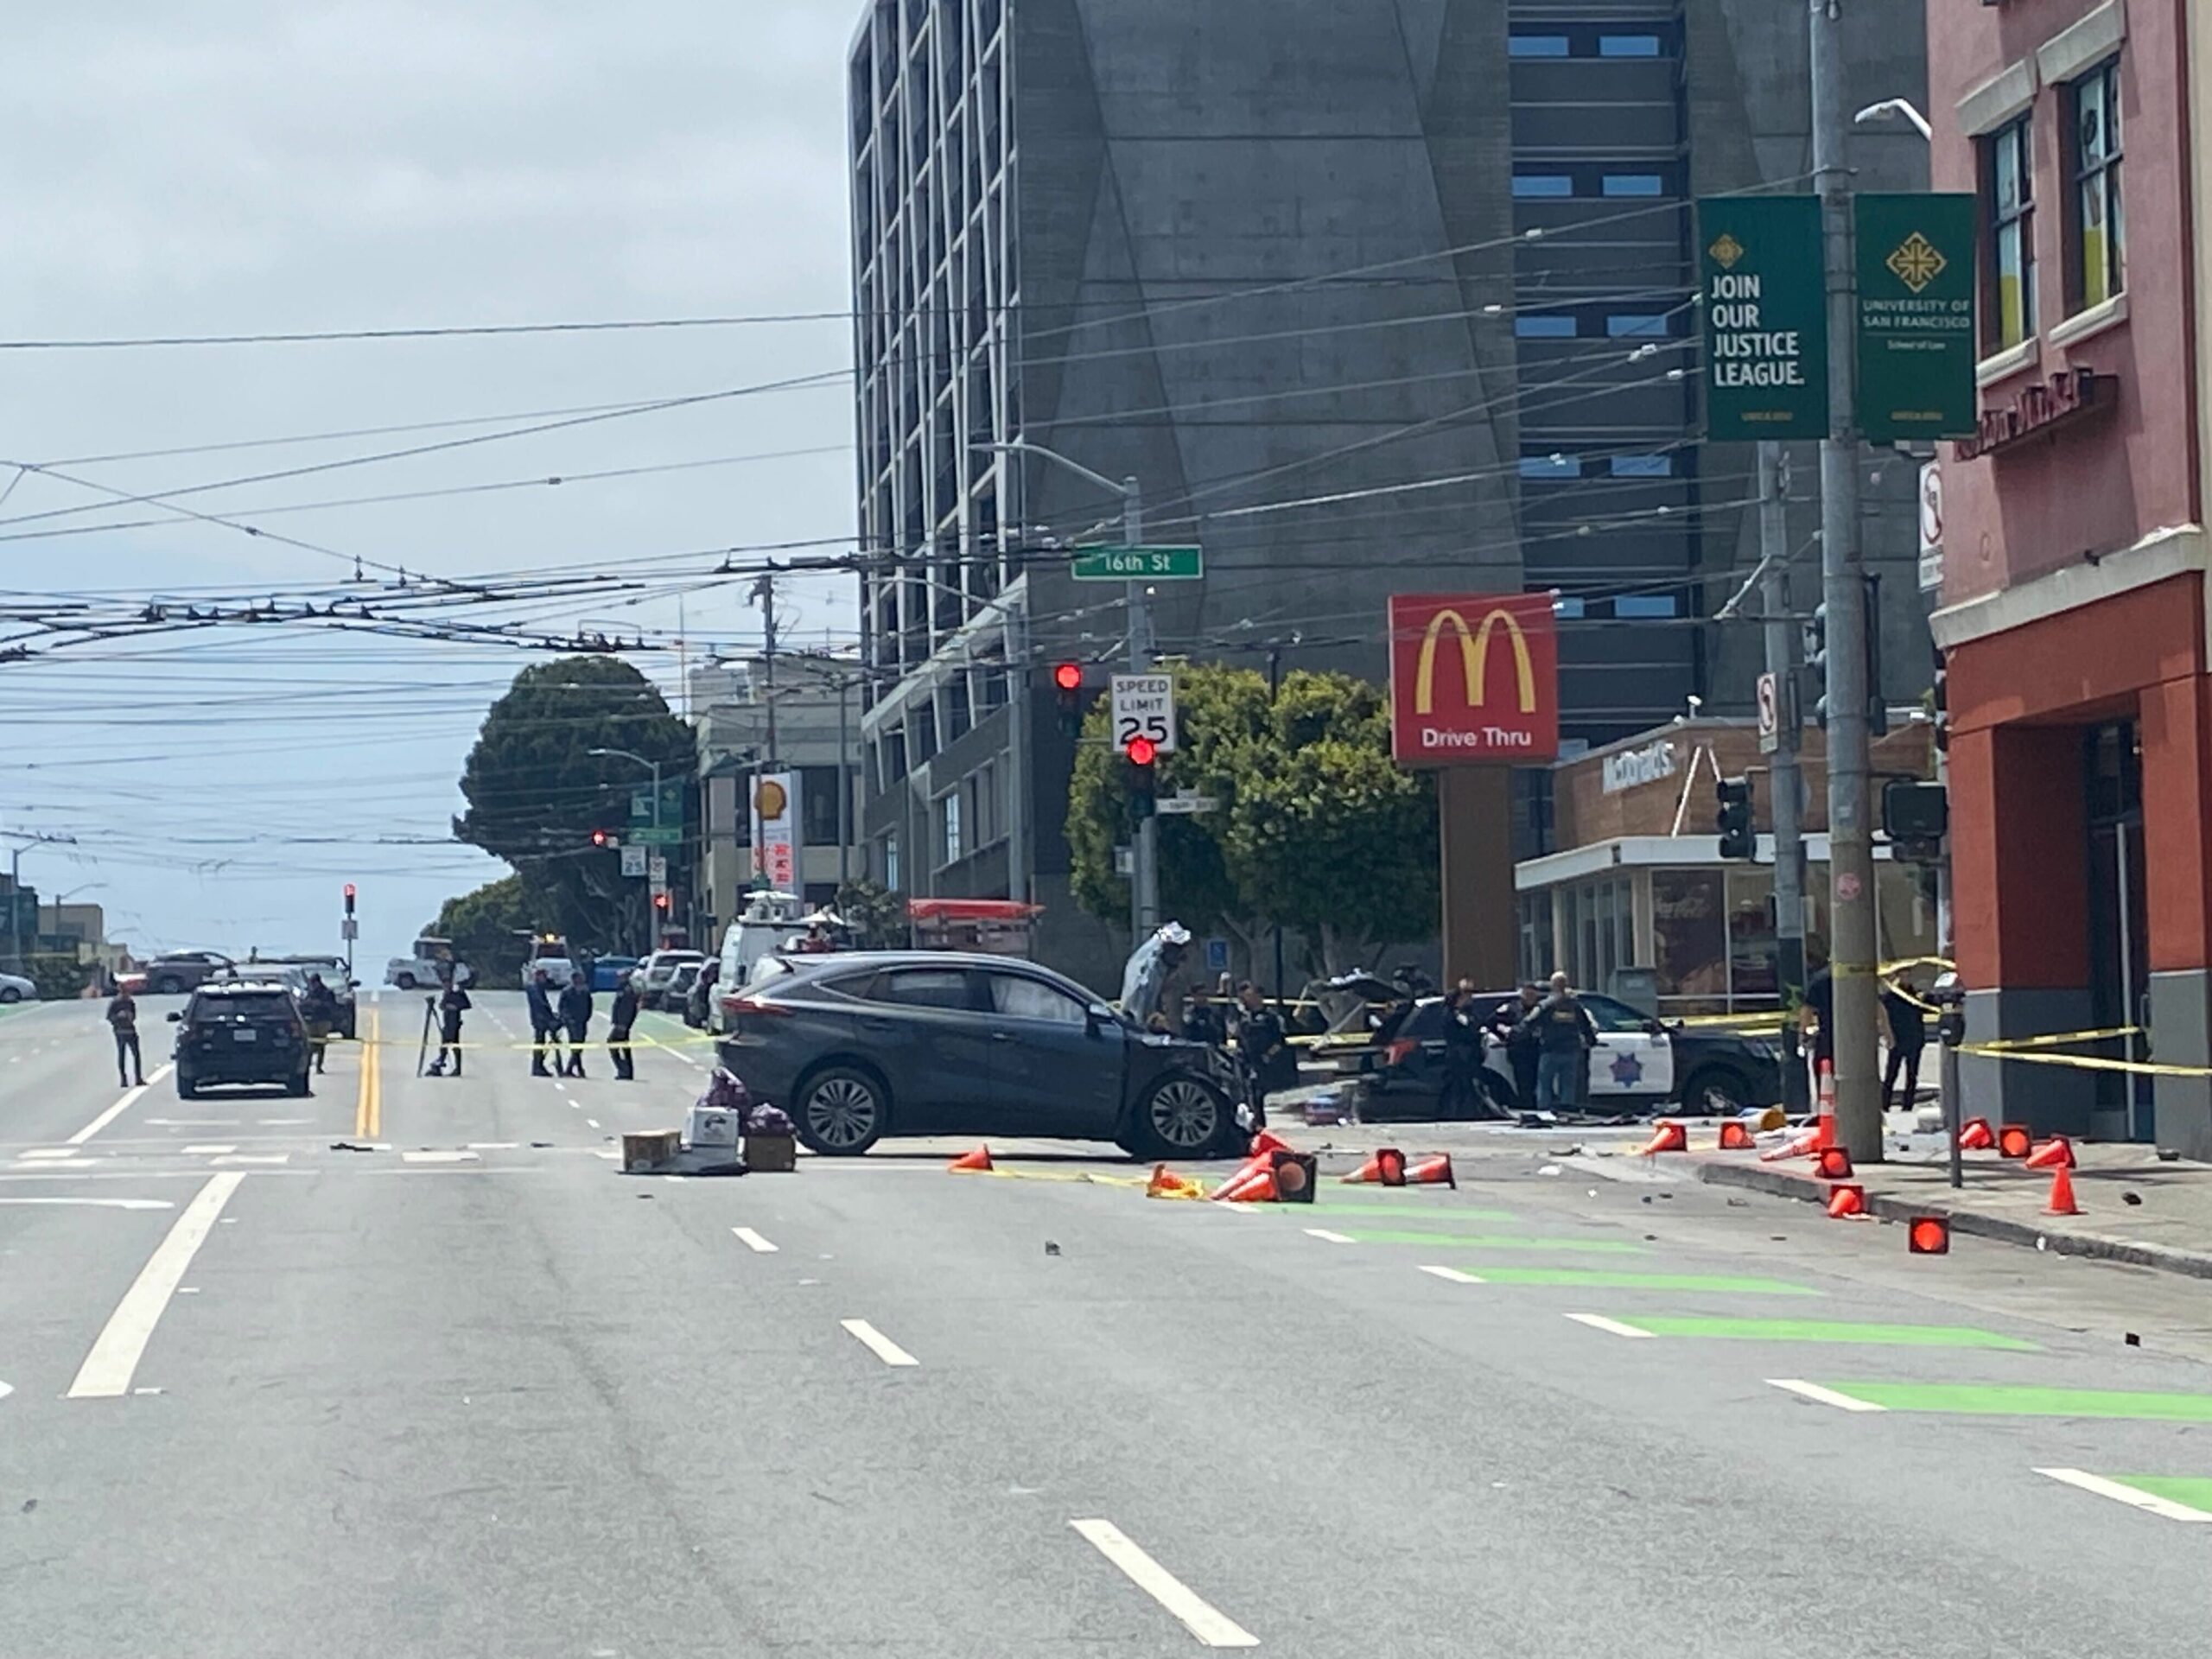 1 Dead in Crash After Carjacking, Police Chase in San Francisco